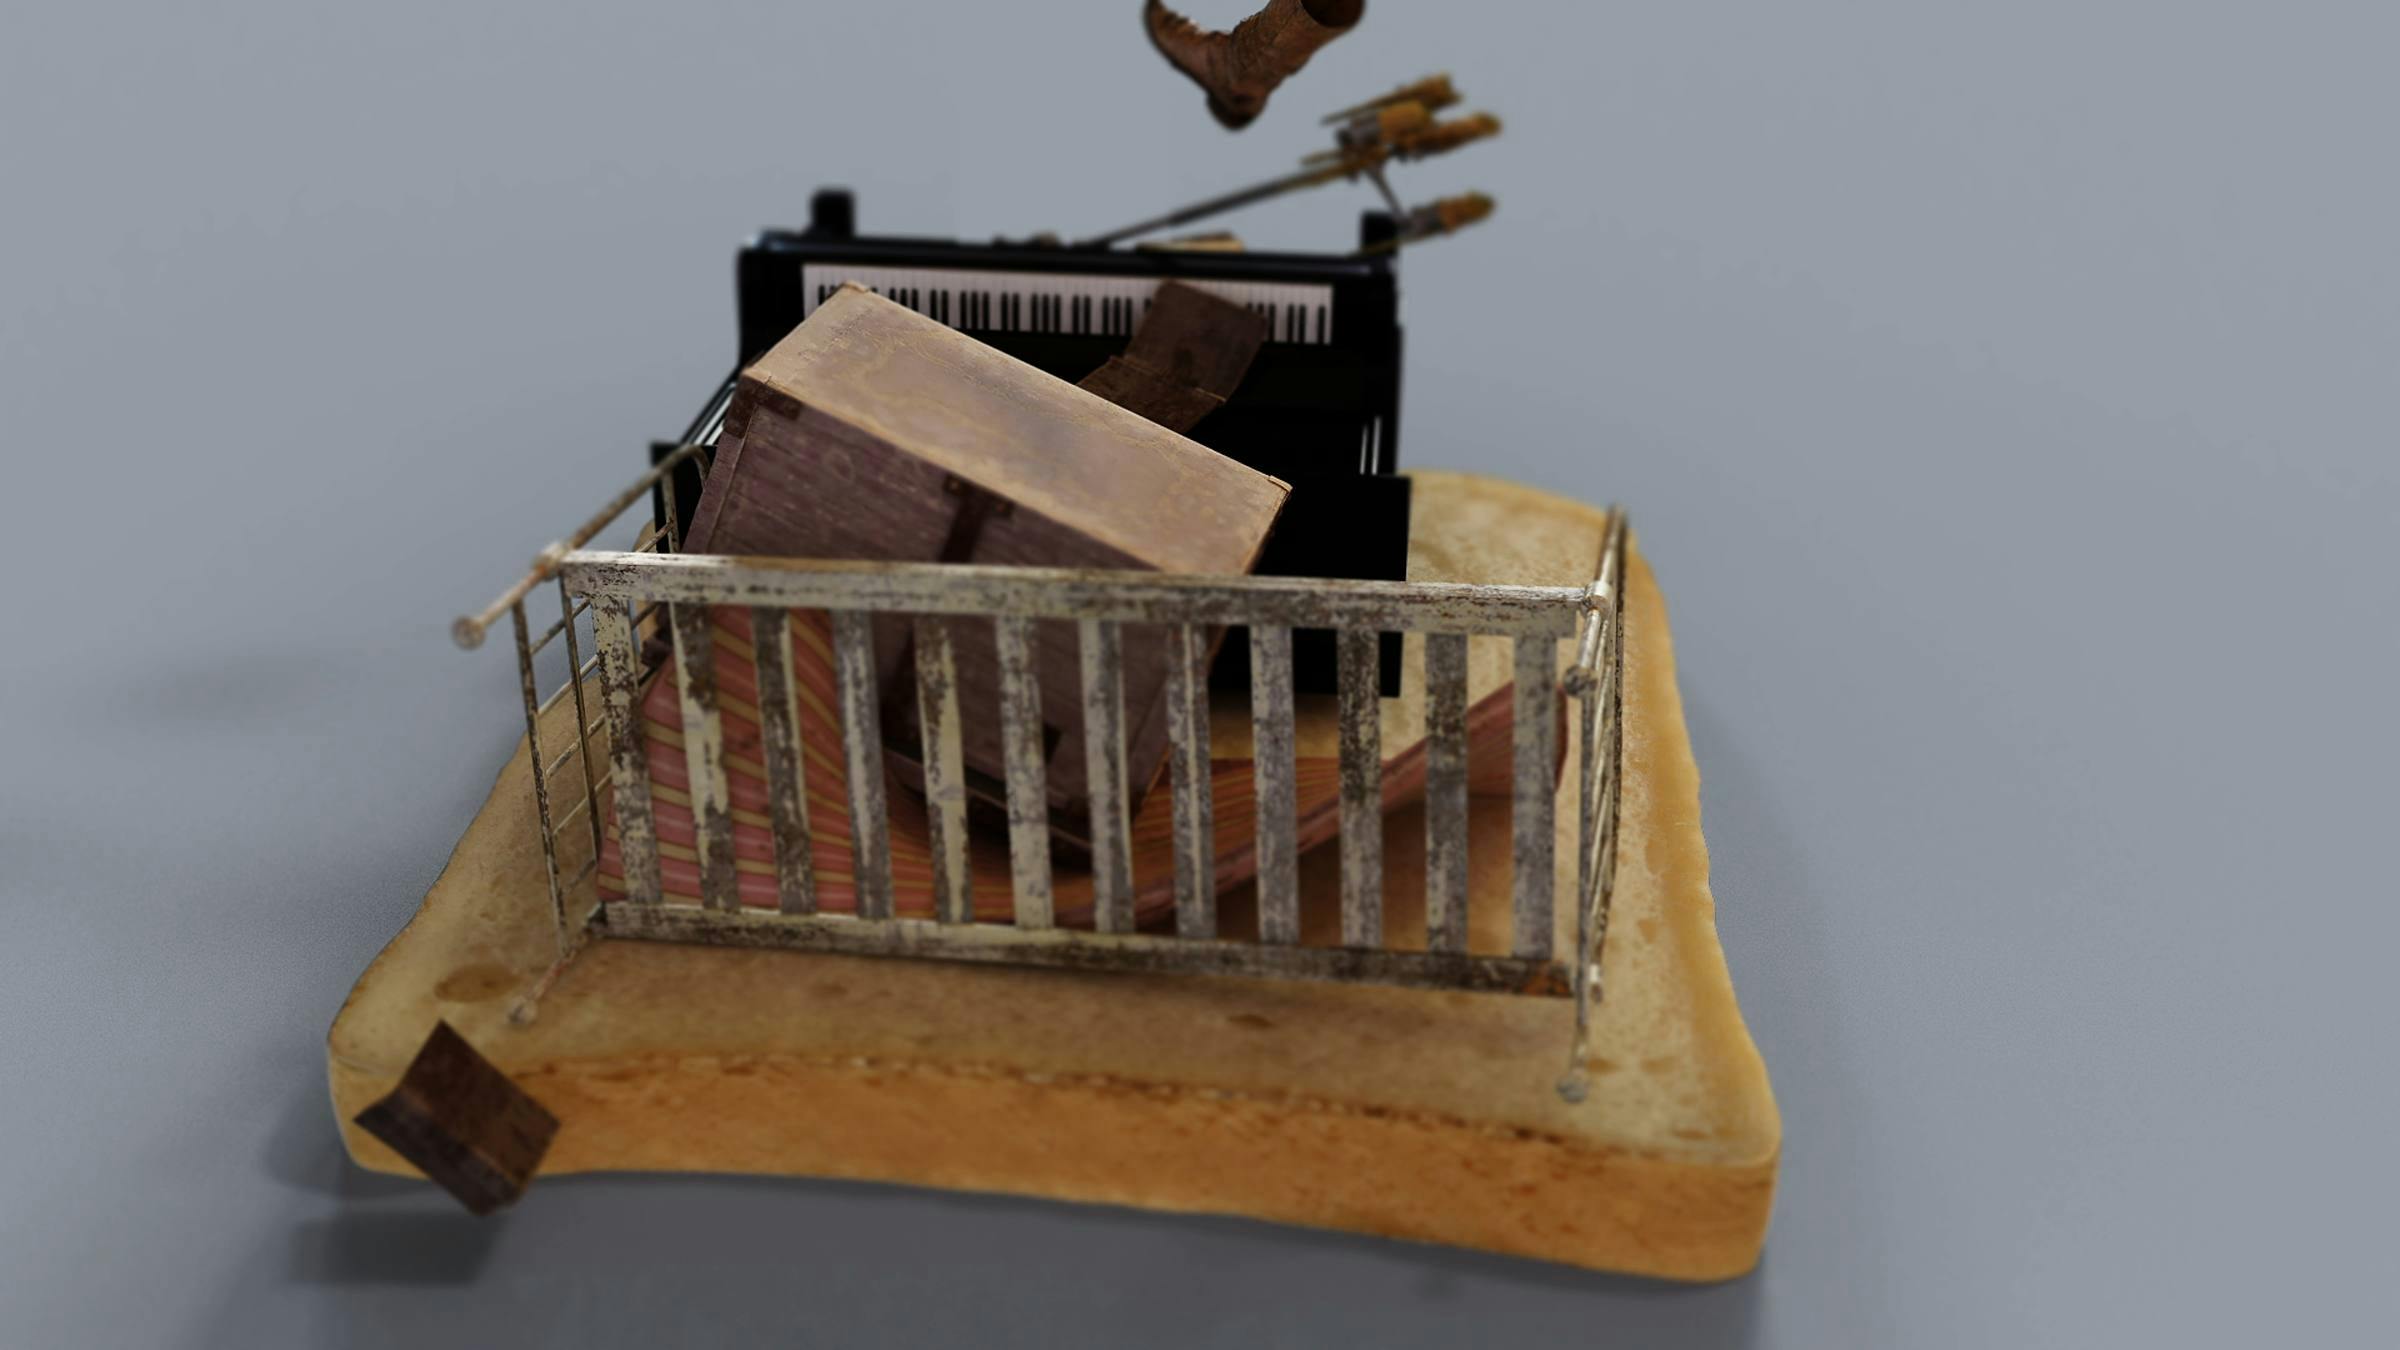 a digitally rendered image of a keyboard, bed frame, cowboy boot and other objects landing on a piece of toast